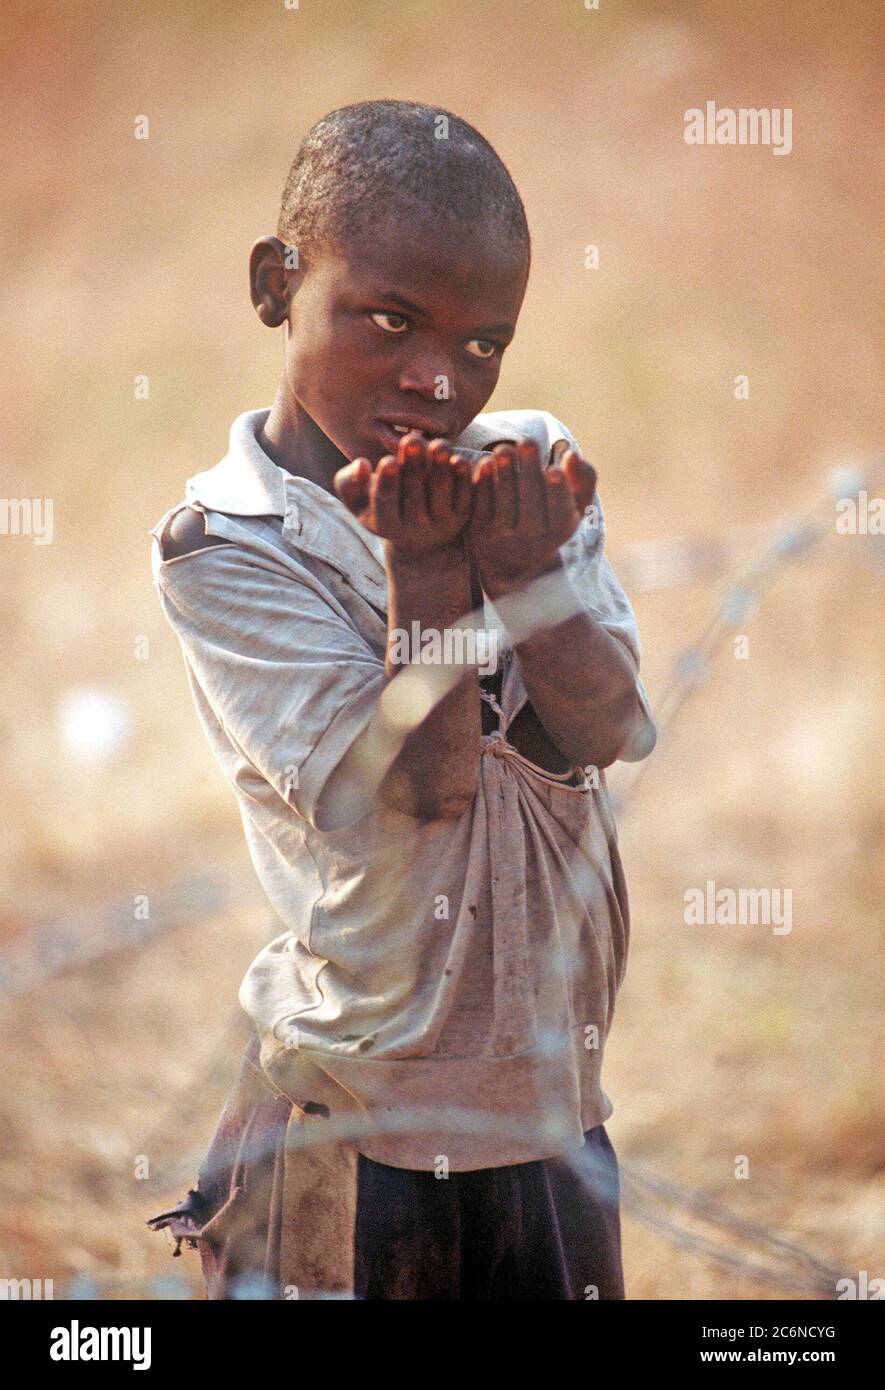 1994 Zaire - A small Rwandan refugee begs for food from United Nations personnel at the Kibumba refugee camp.  He is one of the estimated 1.2 million Rwandan refugees fled to Zaire after a civil war erupted in their country. Stock Photo